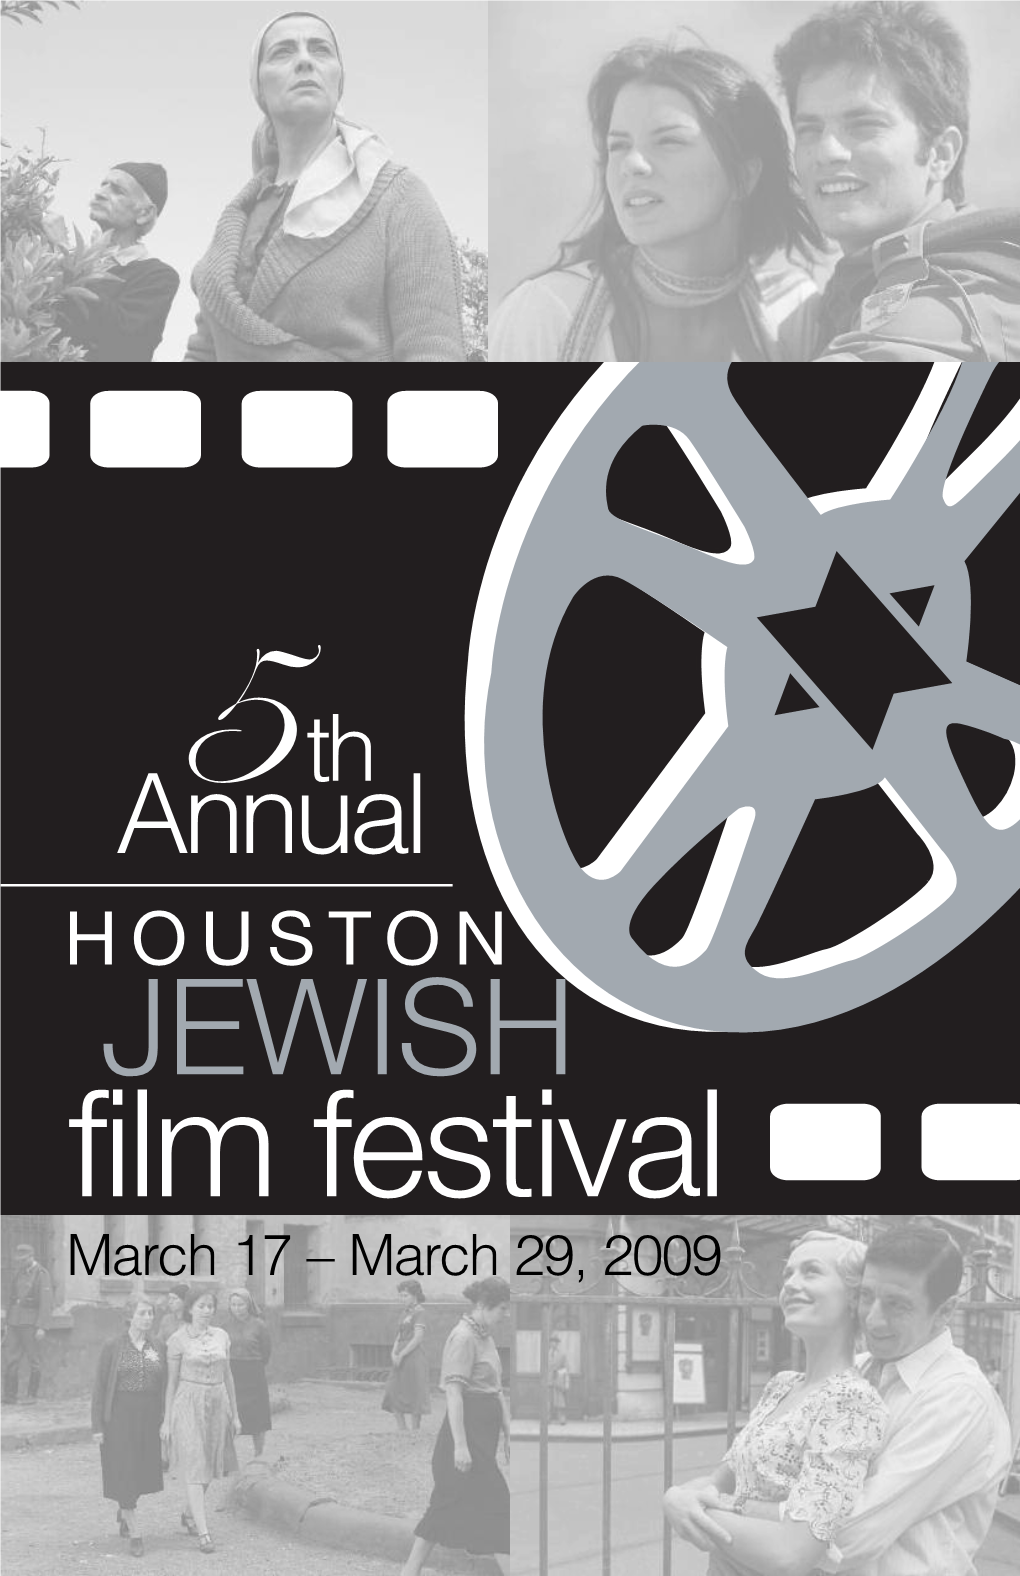 HOUSTON JEWISH Film Festival March 17 – March 29, 2009 Fabulous Fifth Year of Films